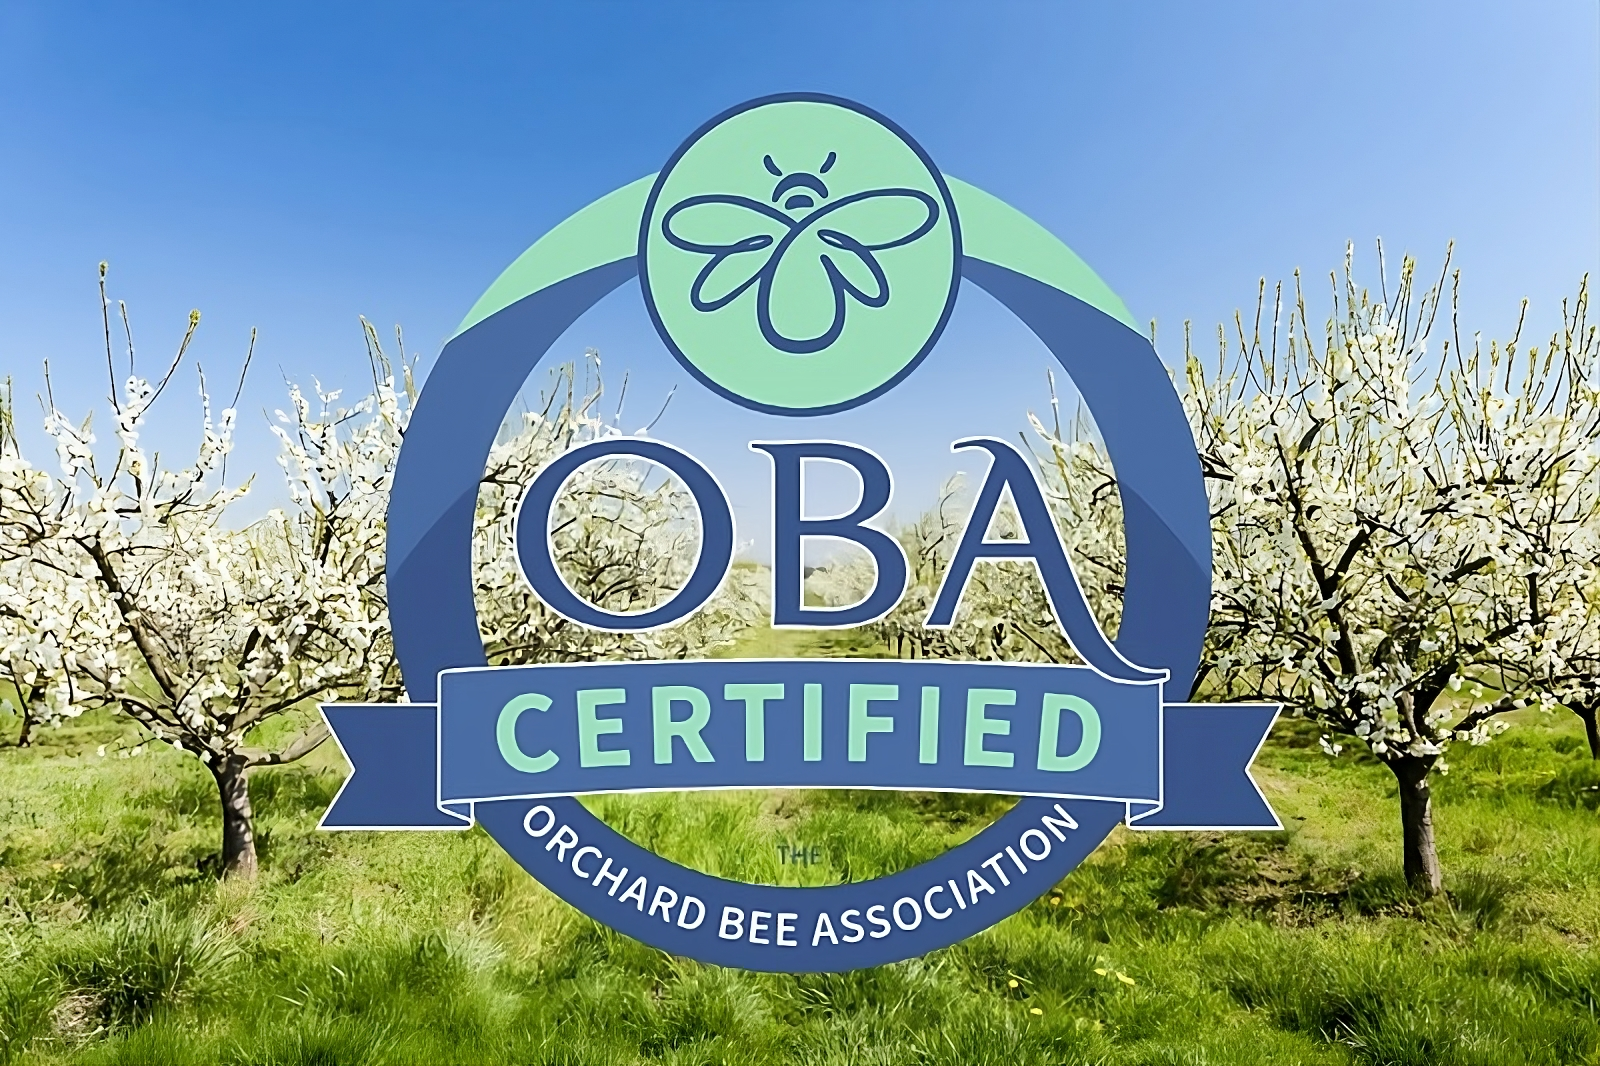 Orchard Bee Association